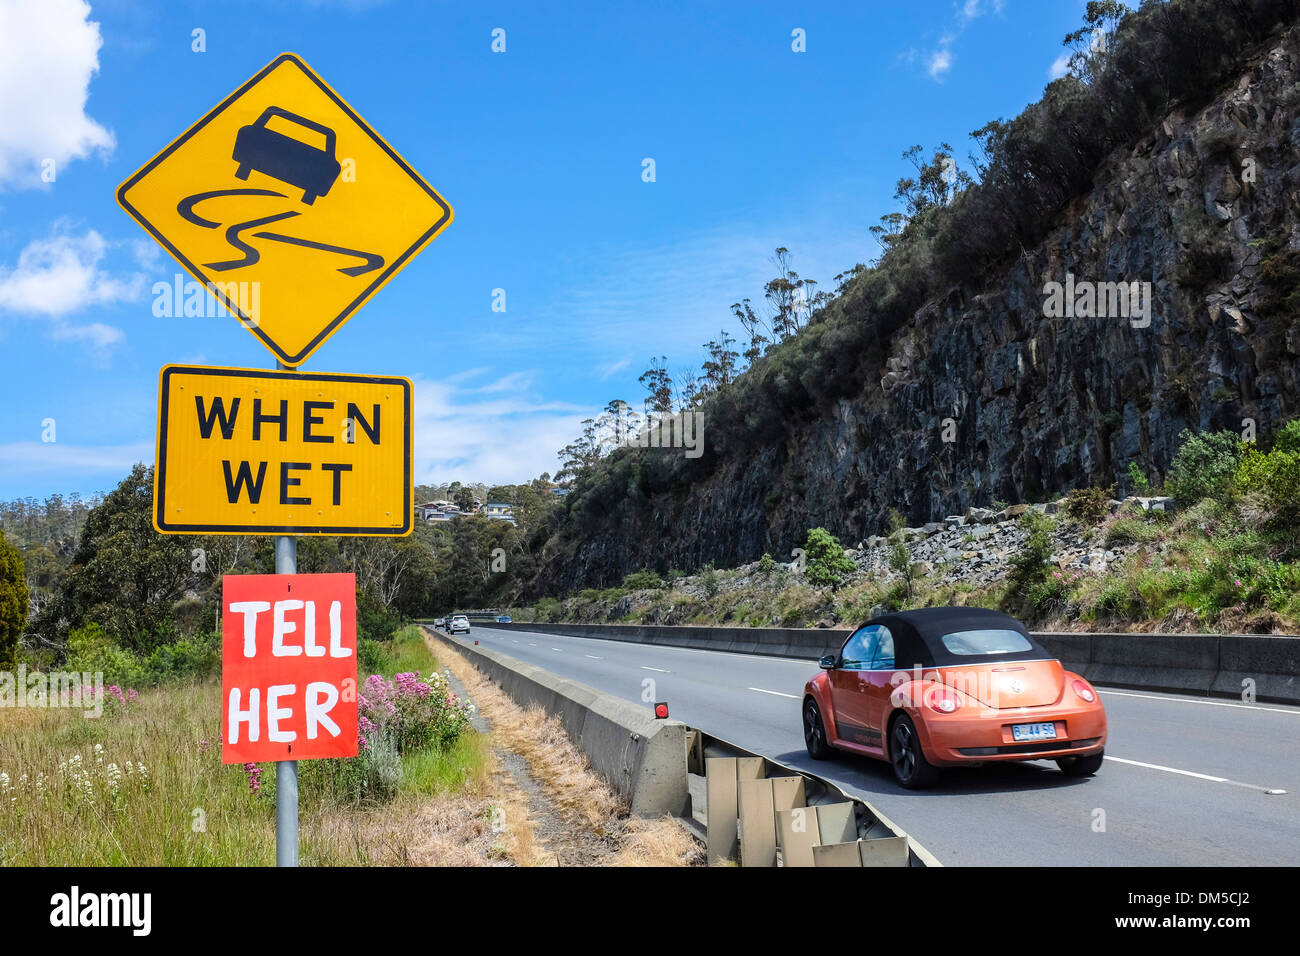 Enigmatic sign on a post by the highway suggesting perhaps a romantic affair. Stock Photo